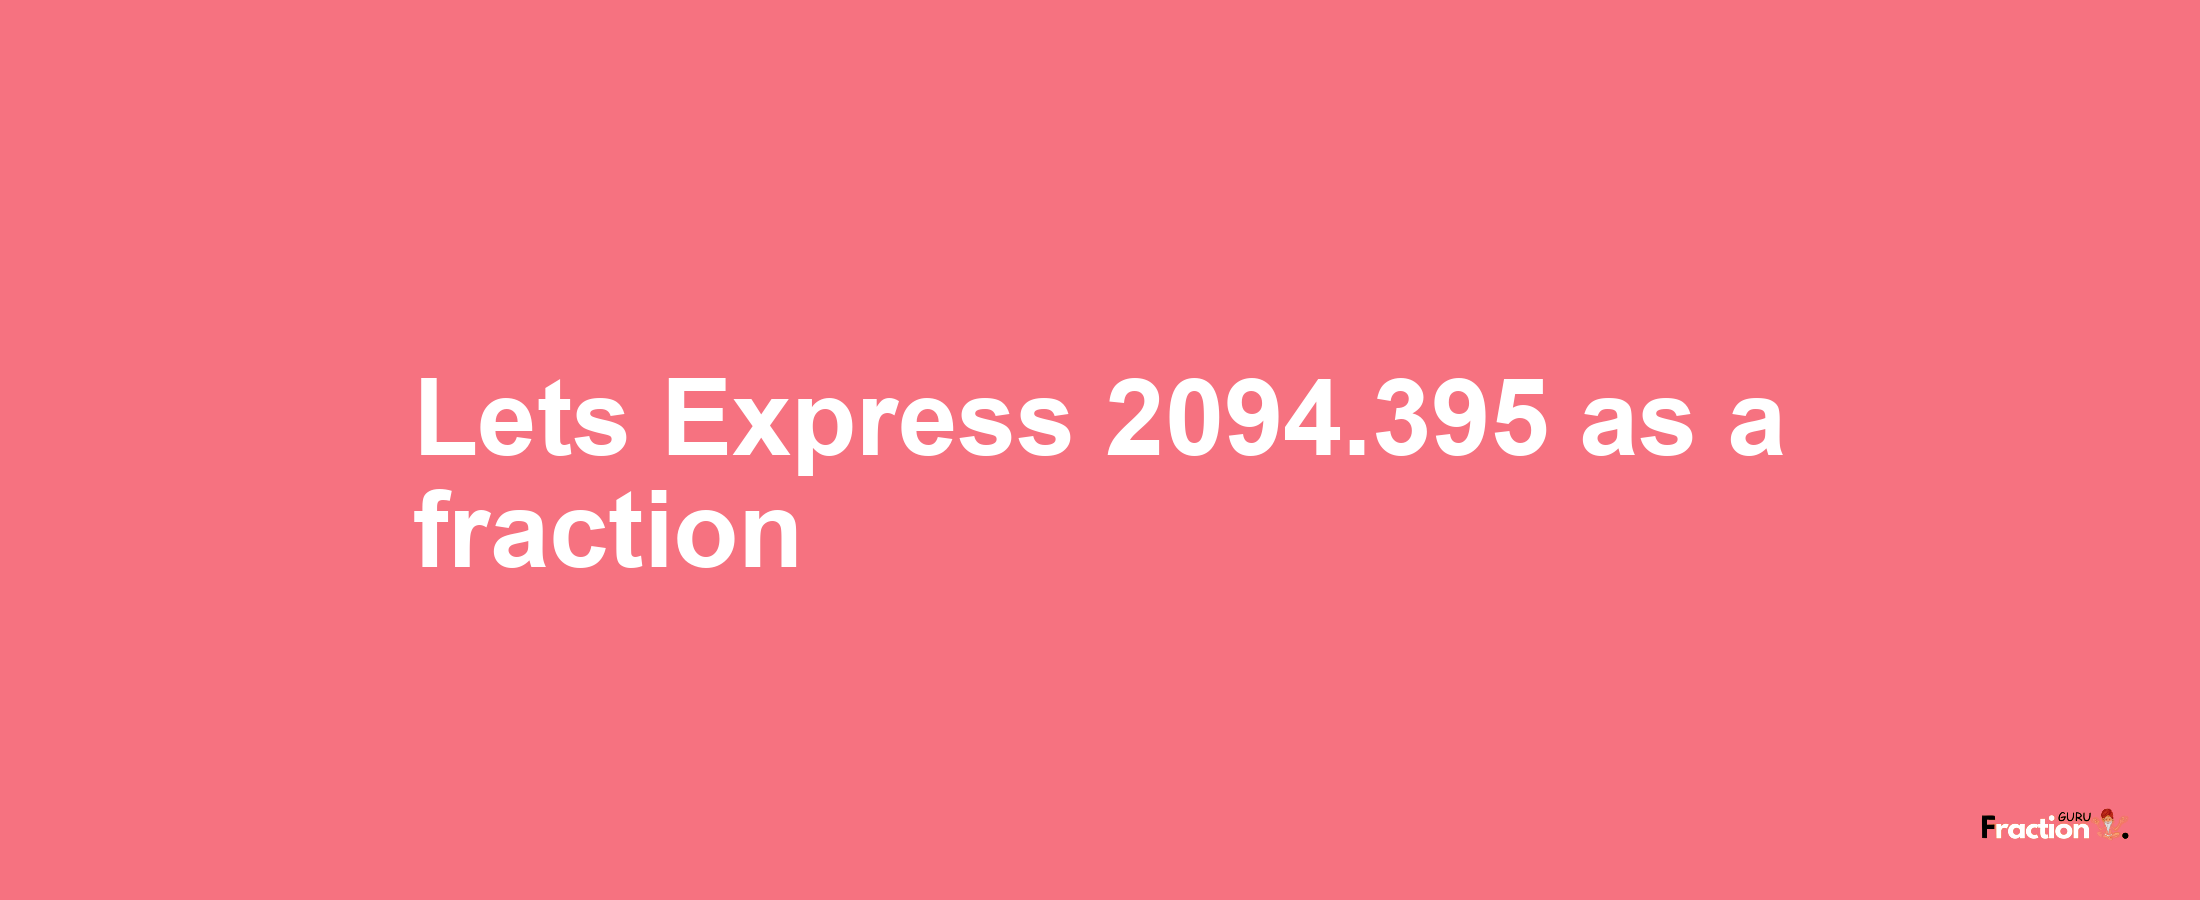 Lets Express 2094.395 as afraction